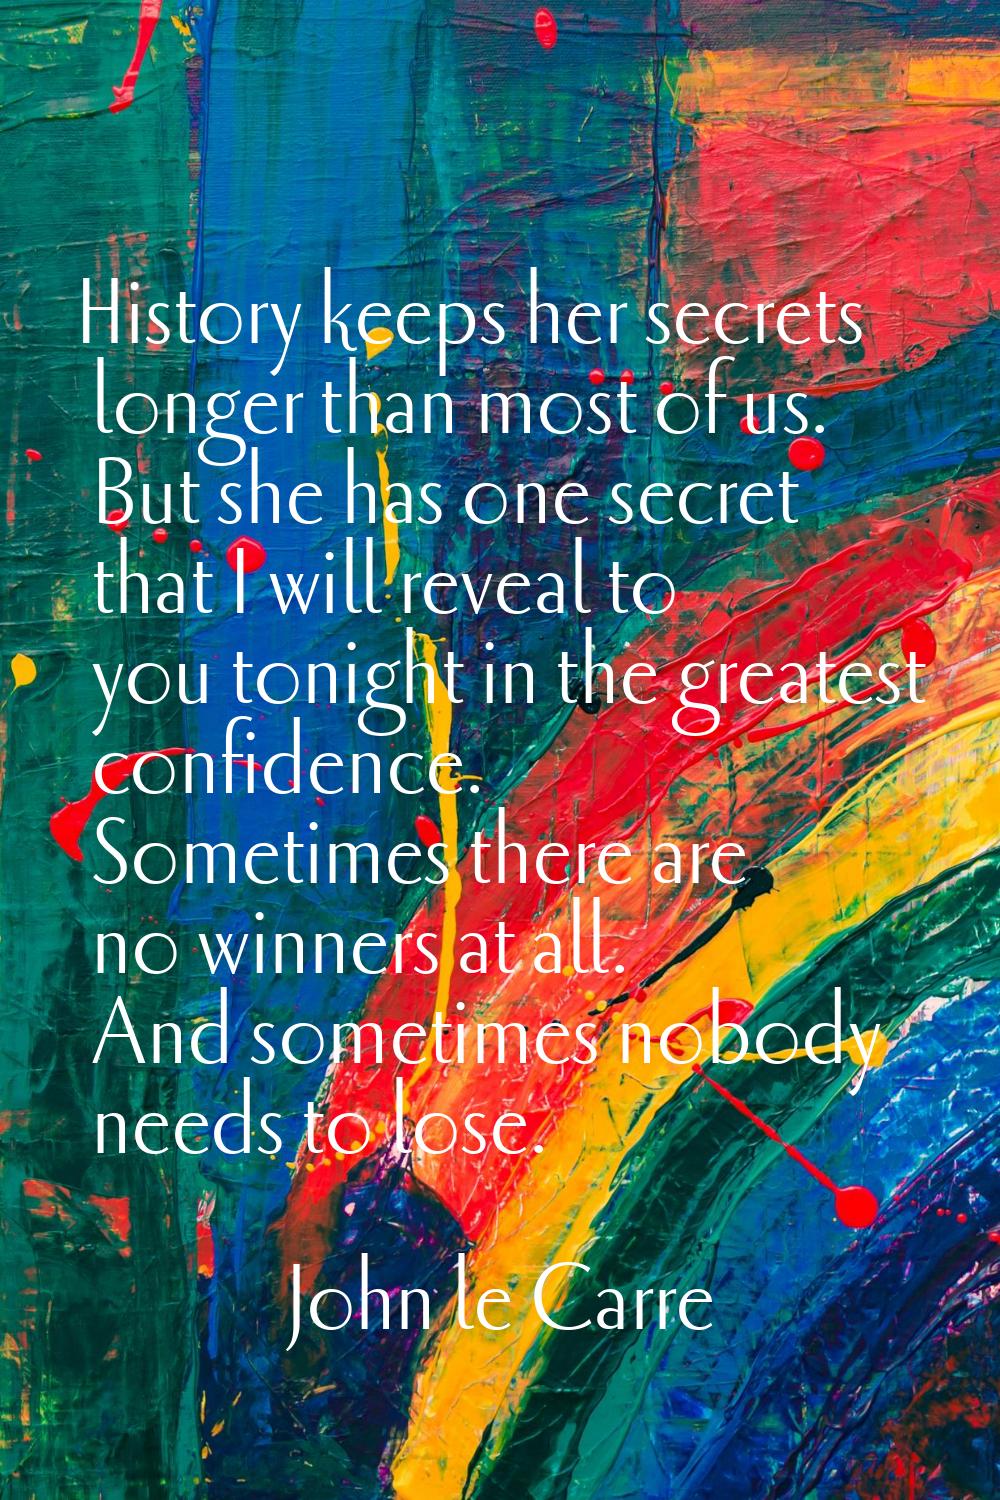 History keeps her secrets longer than most of us. But she has one secret that I will reveal to you 